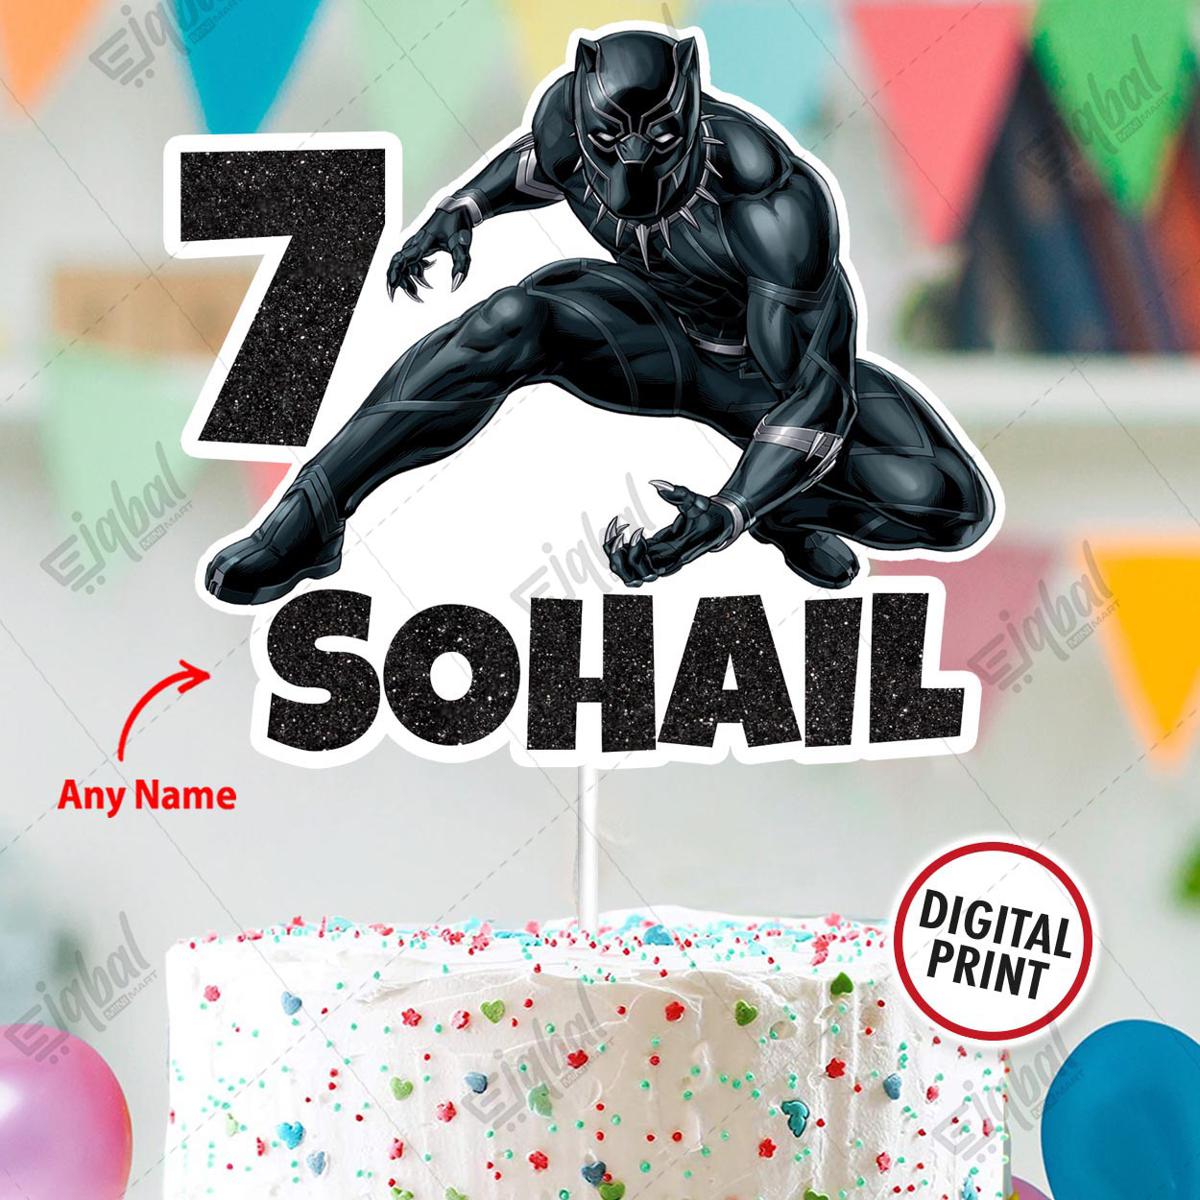 Sweet GoodGood Treats - BLACK PANTHER #BlackPanther #BlackPantherCake #Cake  #BoyCake #PantherCake #BirthdayCake #BeautifulCake #VanillaCake  #Buttercreamfrosting #BirthdayBoy #Cake #Sweets #SweetTooth #Frosting  #Party #Treats #CandyTable #SweetsTable ...